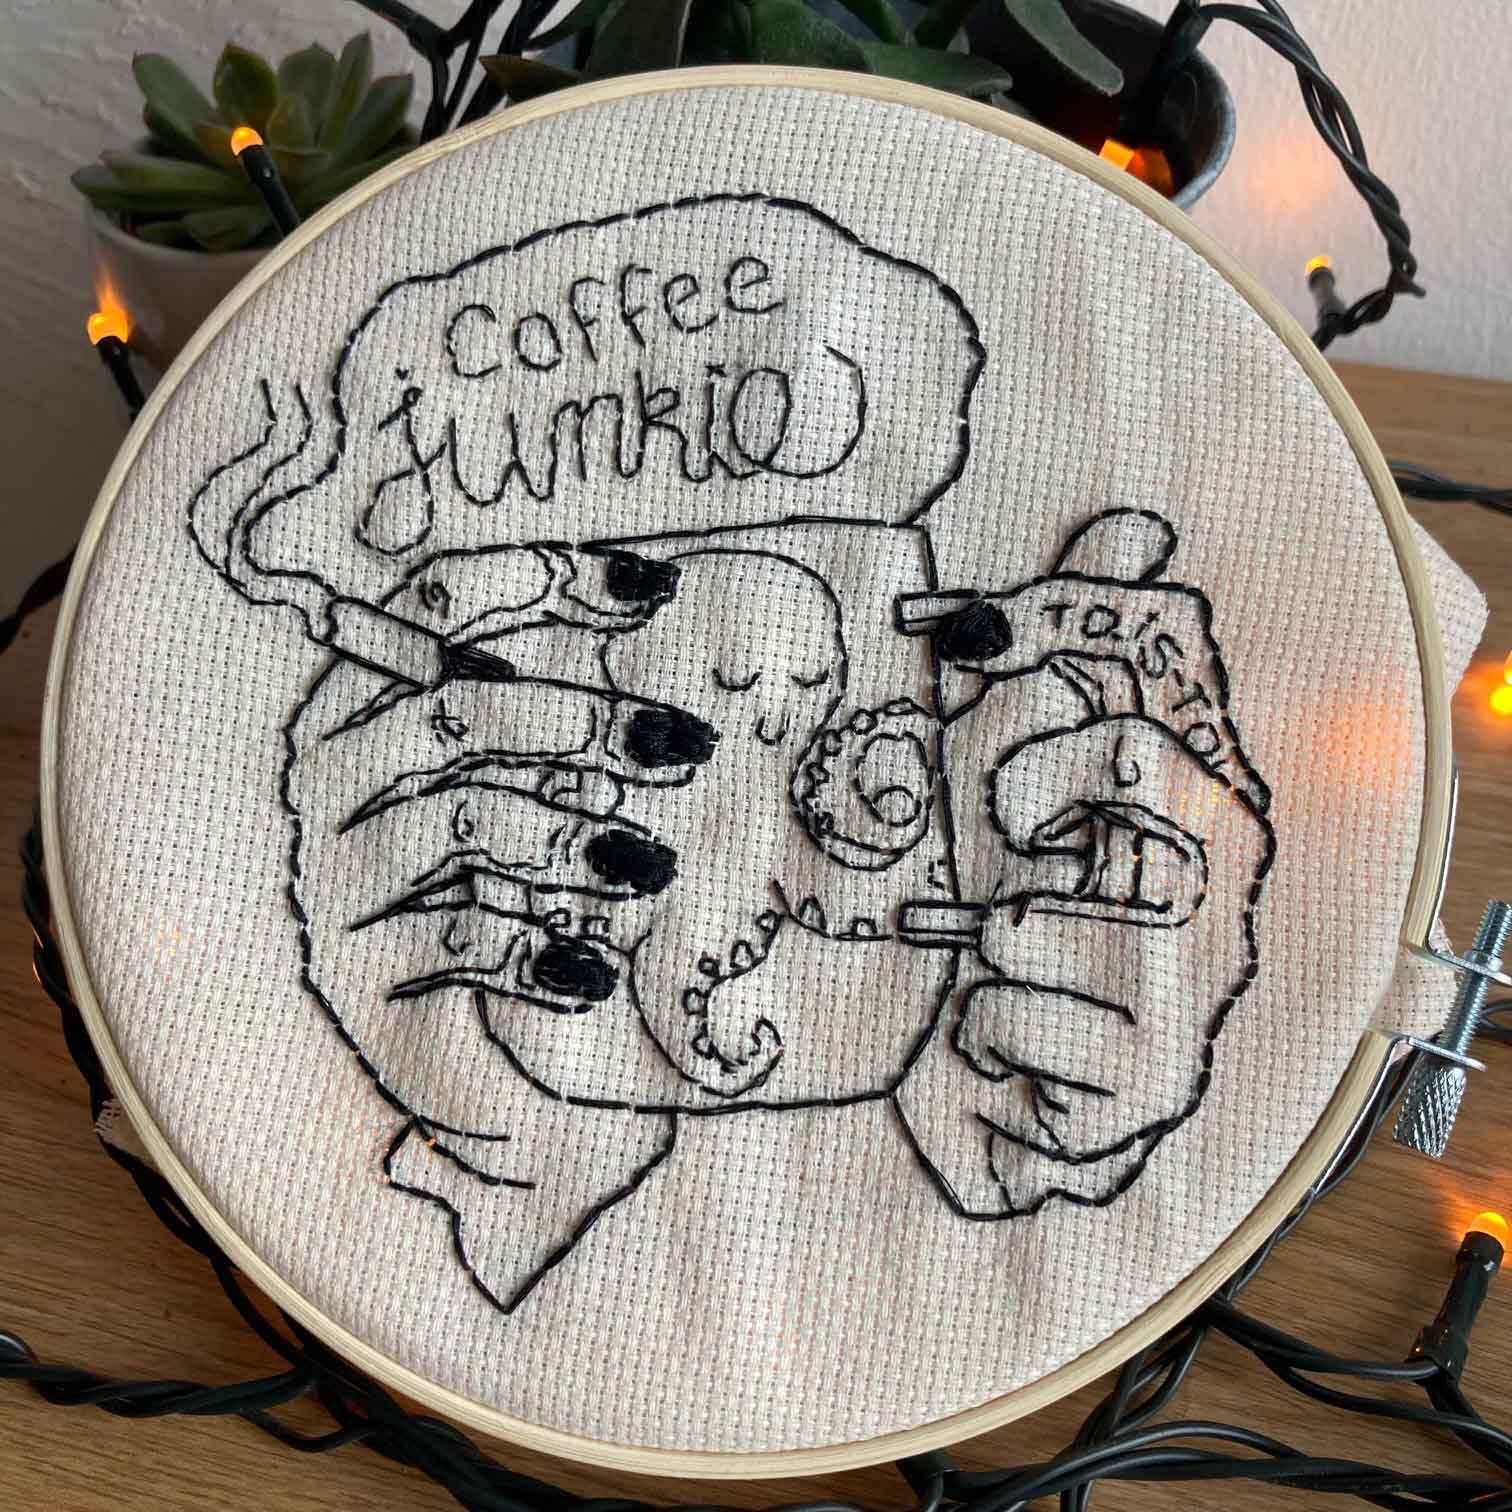 Embroidery illustration of hands holding a cup and a cigarette. Text says "coffee junkie"